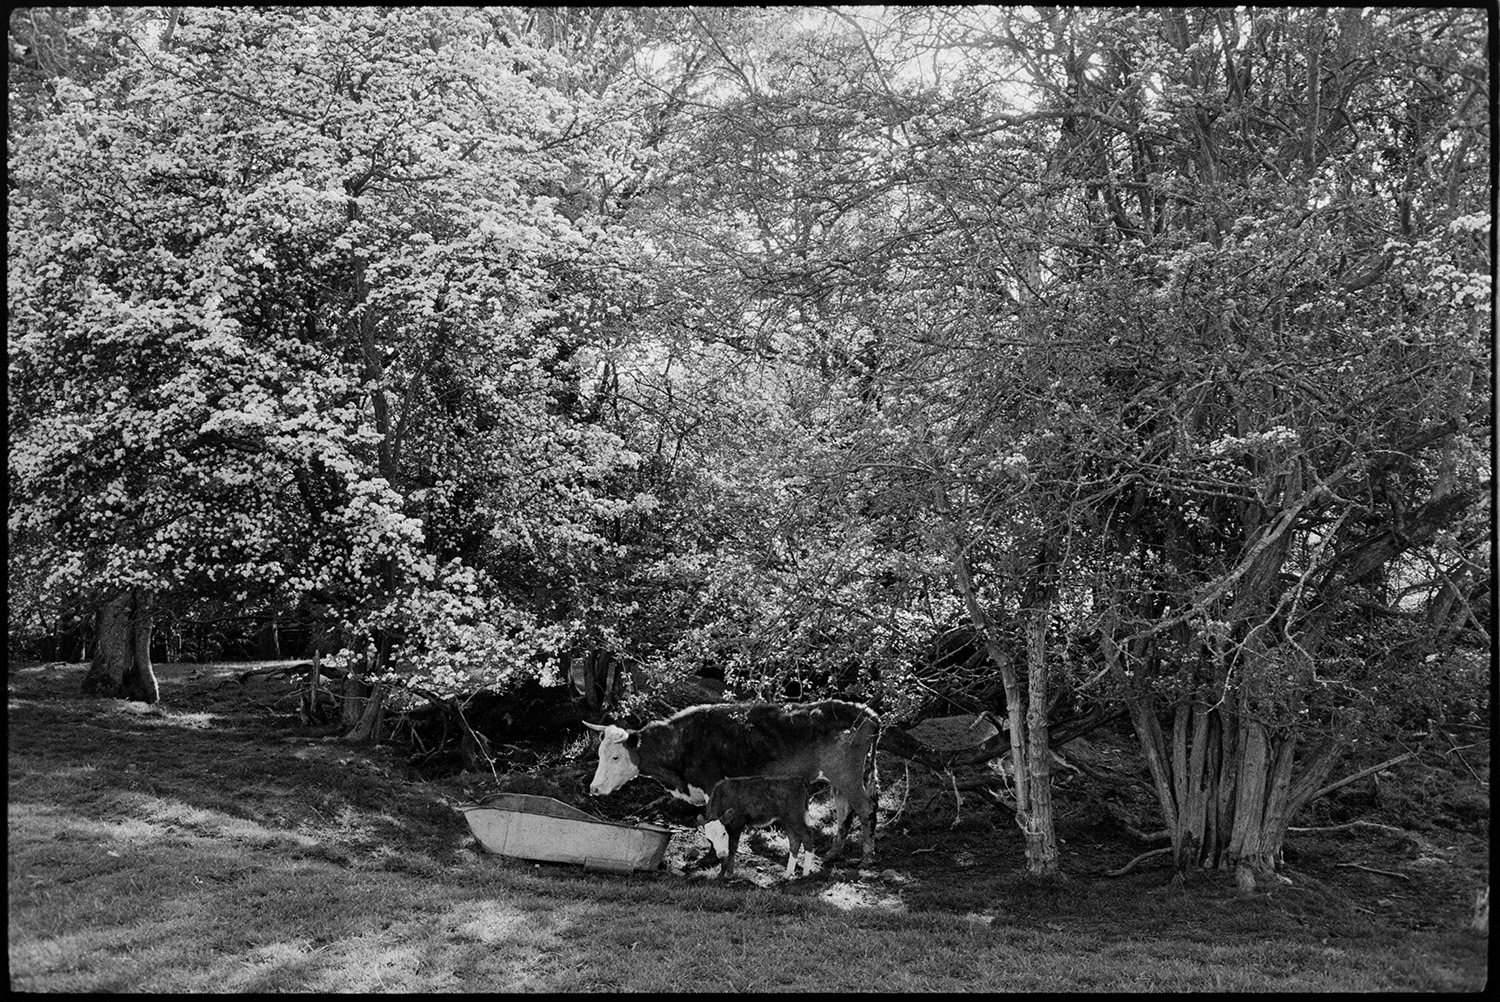 Cow and calf under trees.<br />
[Cow and calf standing next to a tin bath, which is being used as a trough, underneath sun dappled trees at Ashwell, Dolton.]